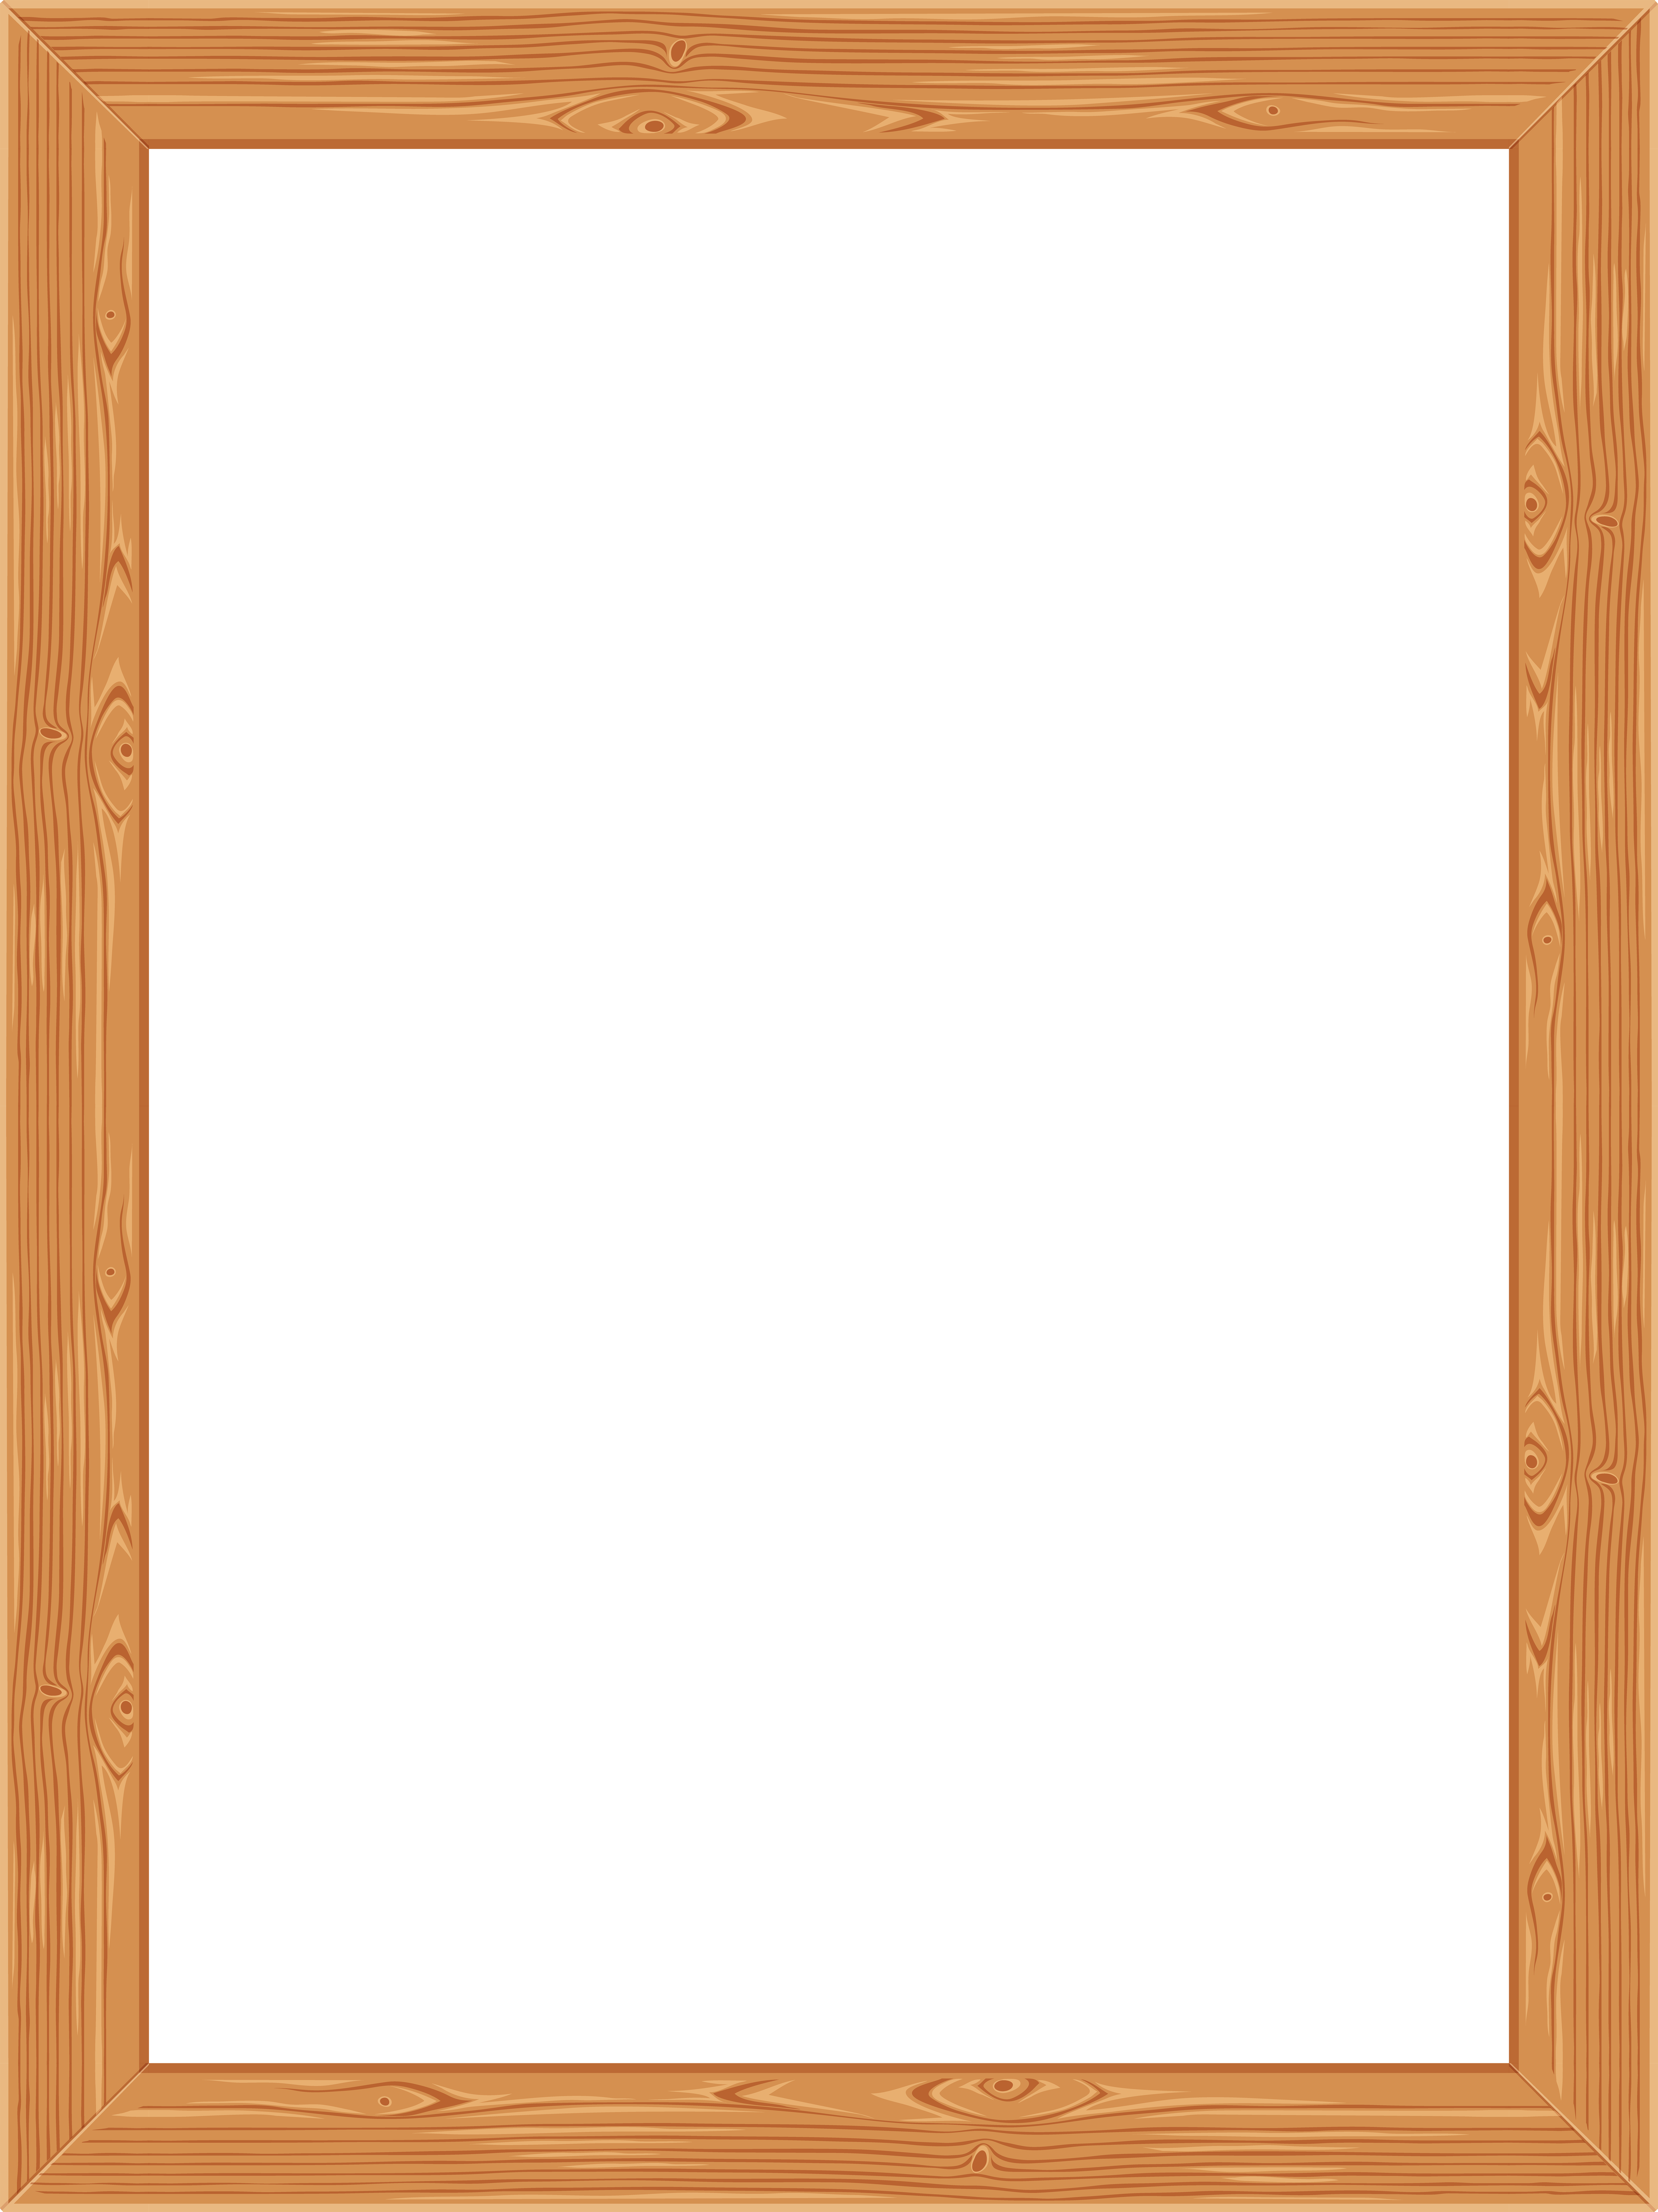 Transparent Classic Wooden Frame PNG Image.